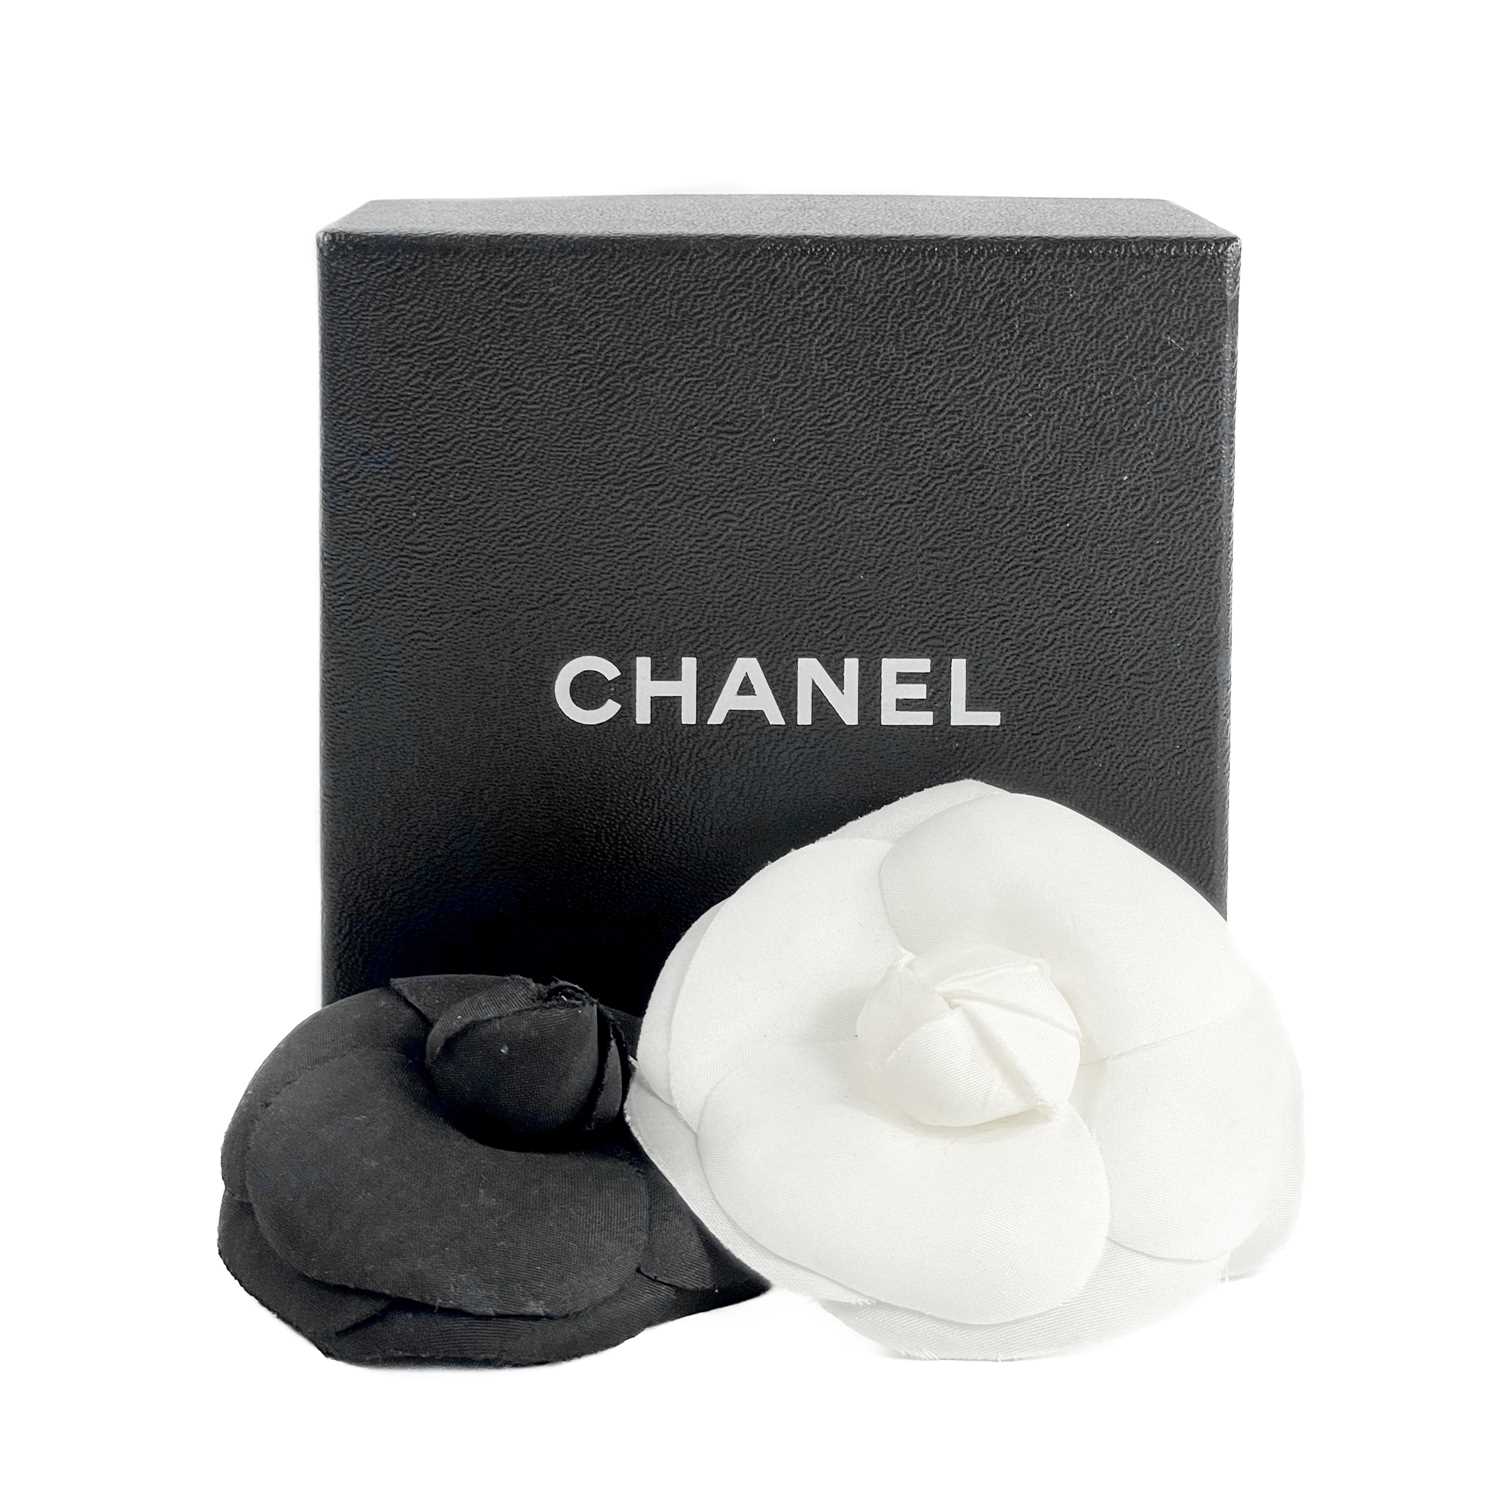 Two 1980s Chanel camellia fabric flower brooches.